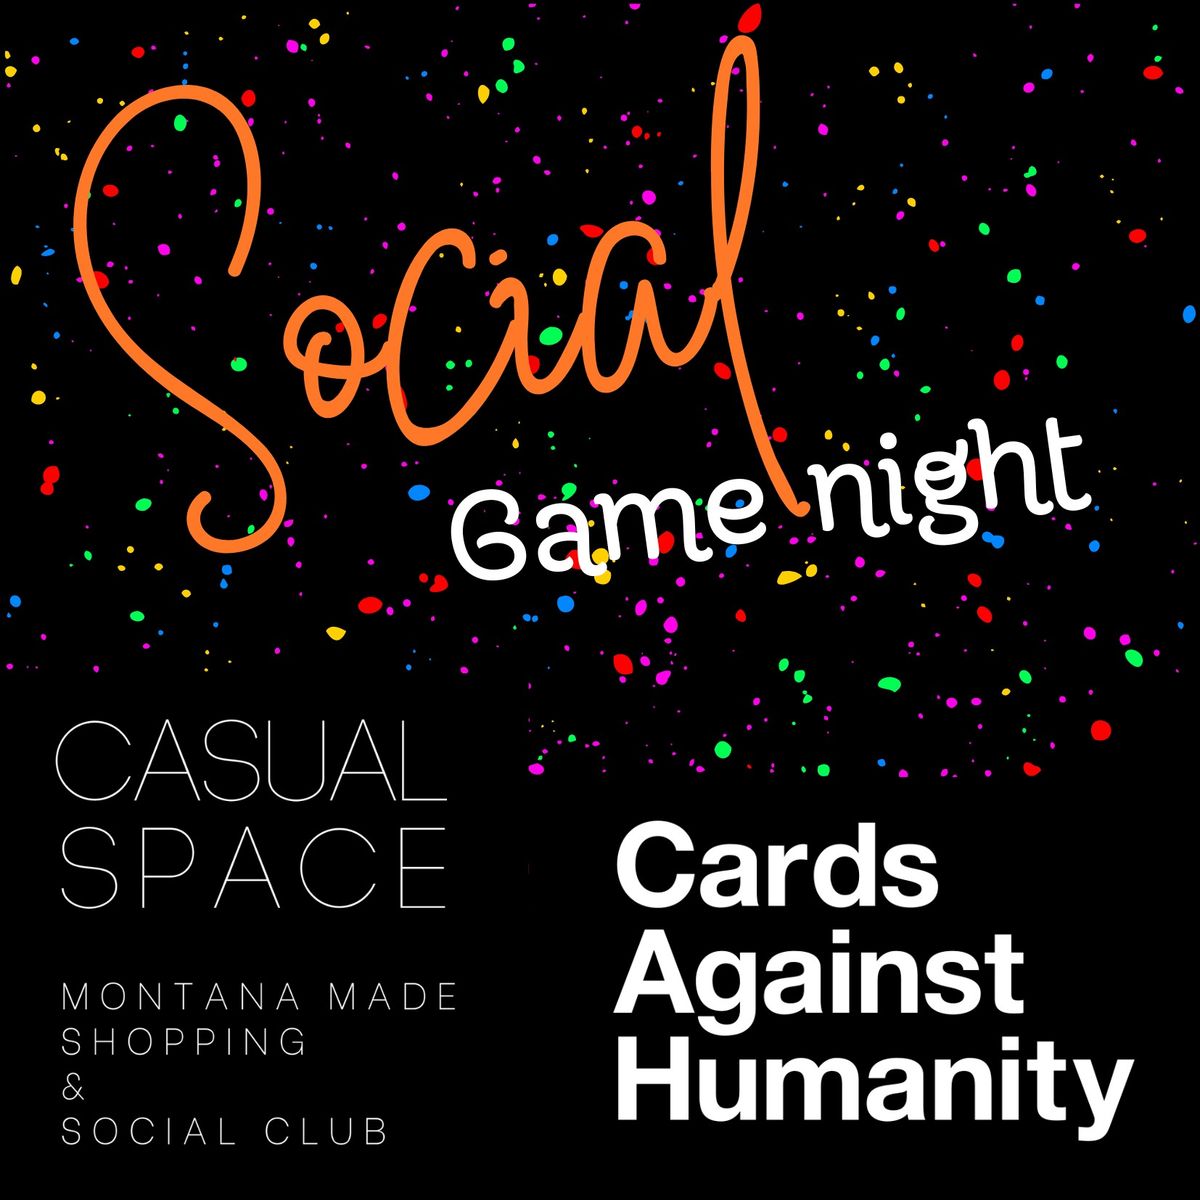 Social Game Night! - Cards Against Humanity